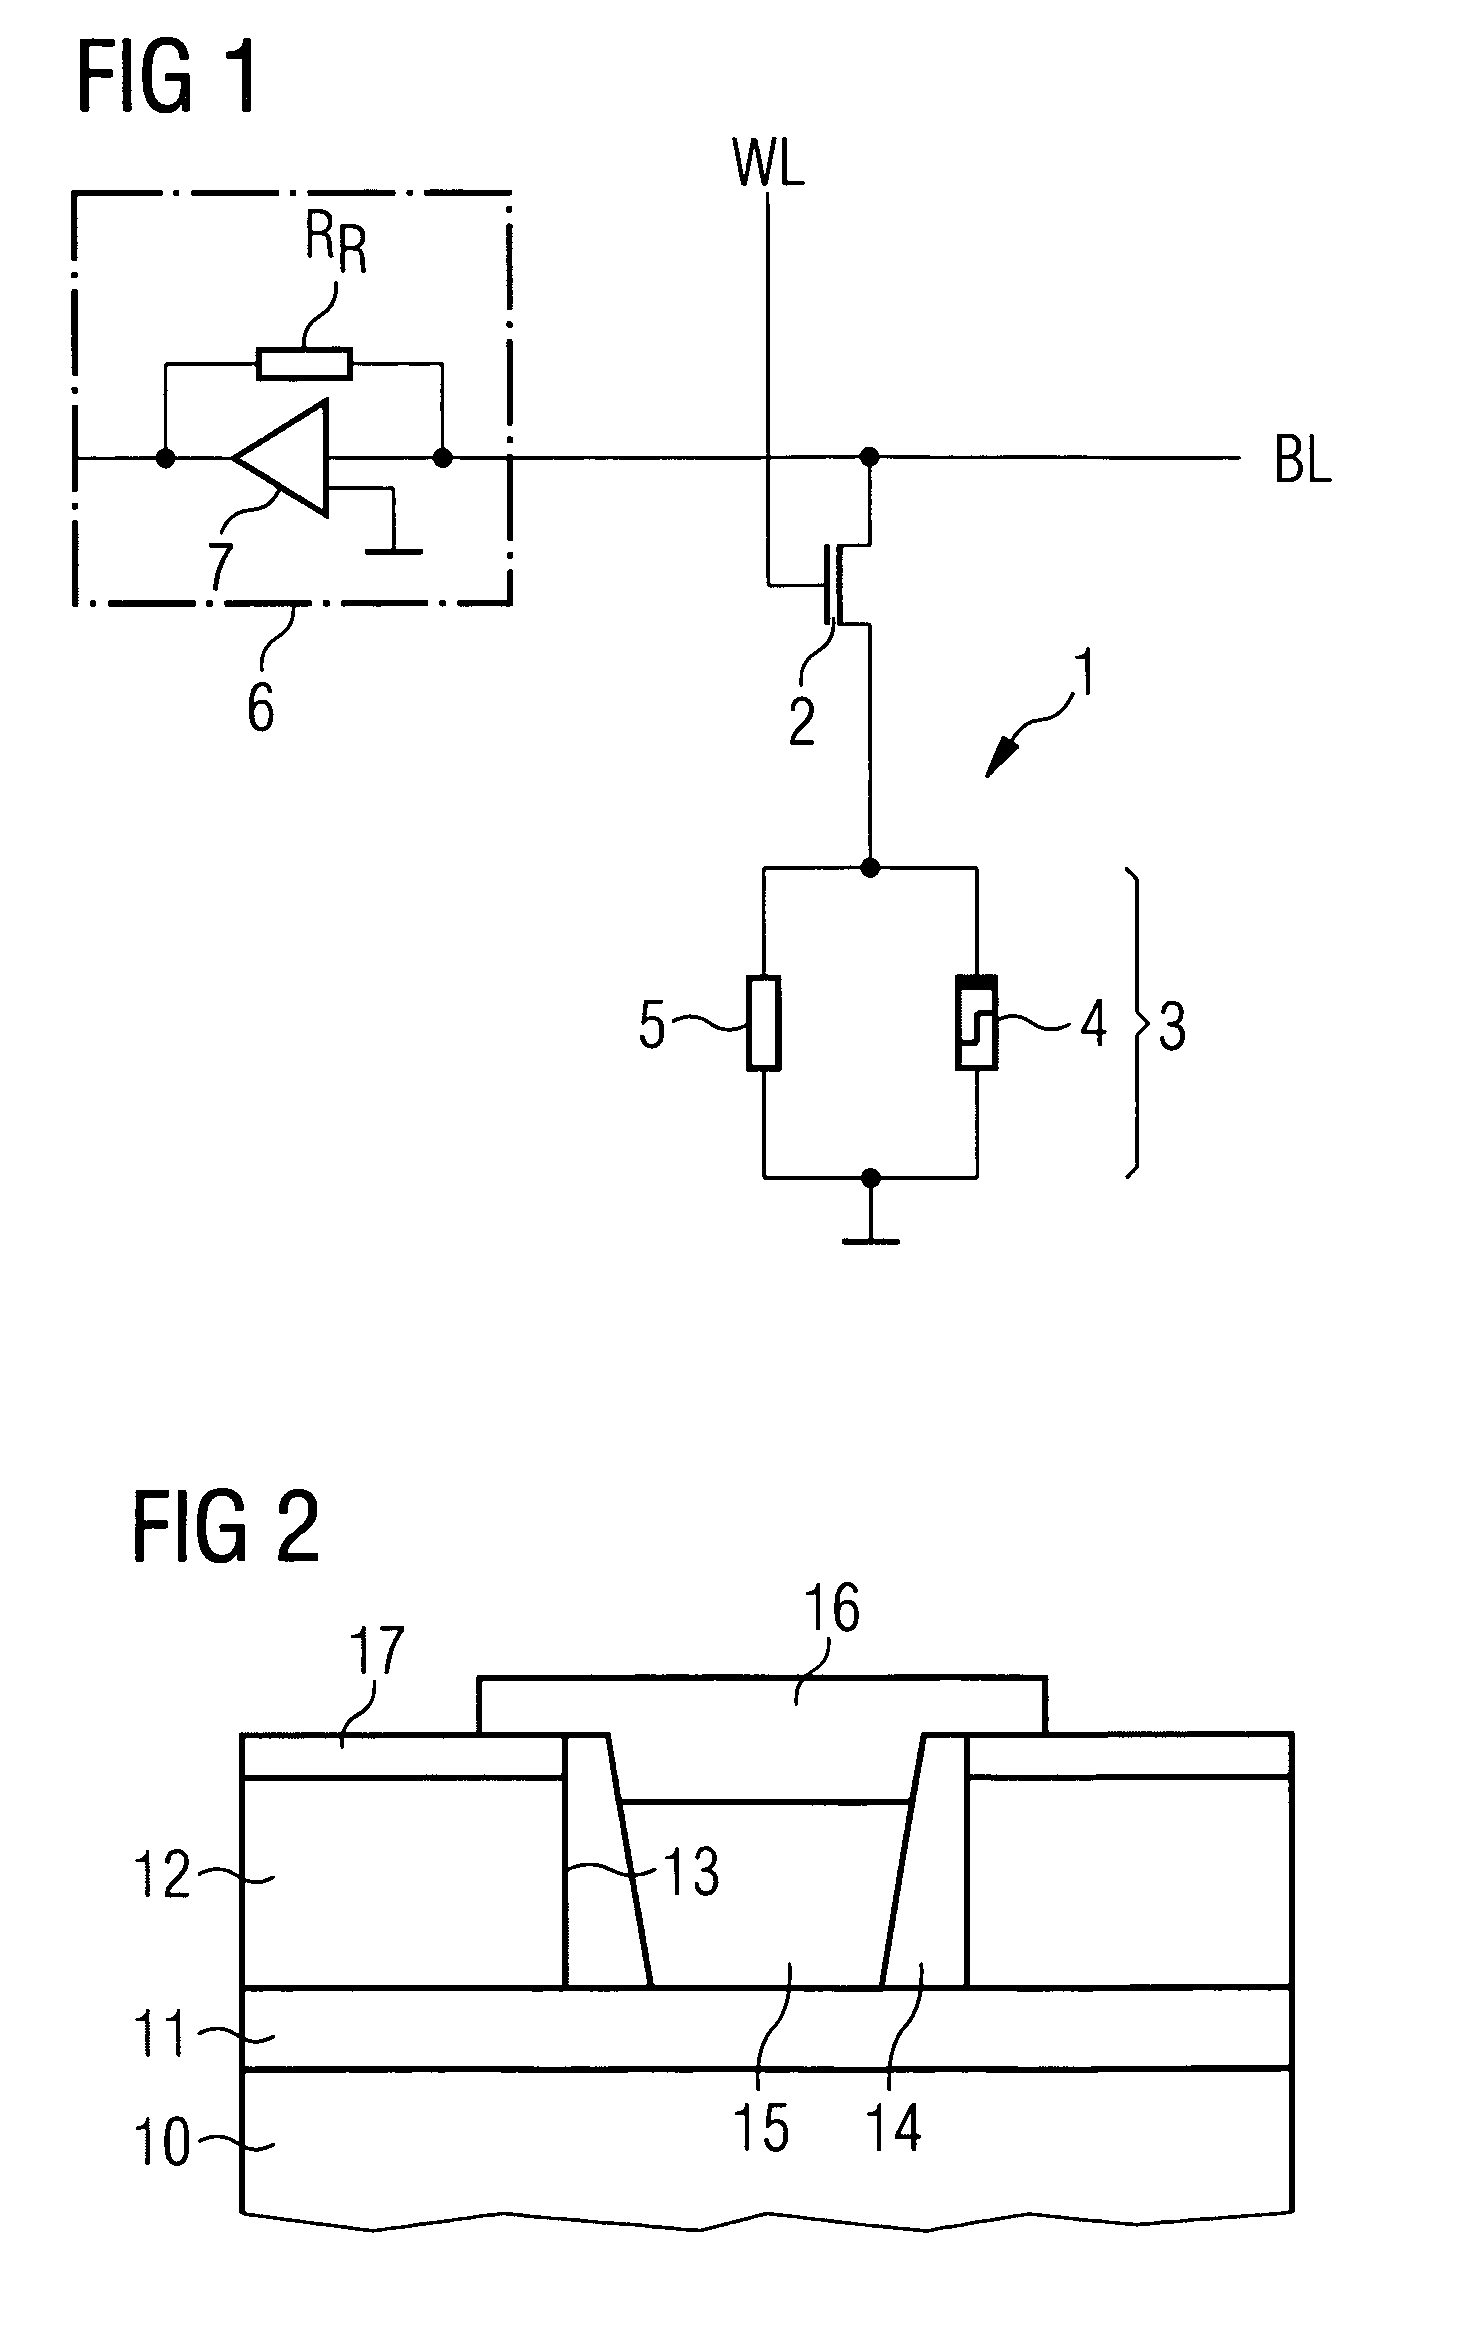 Memory cell for storing an information item, memory circuit and method for producing a memory cell